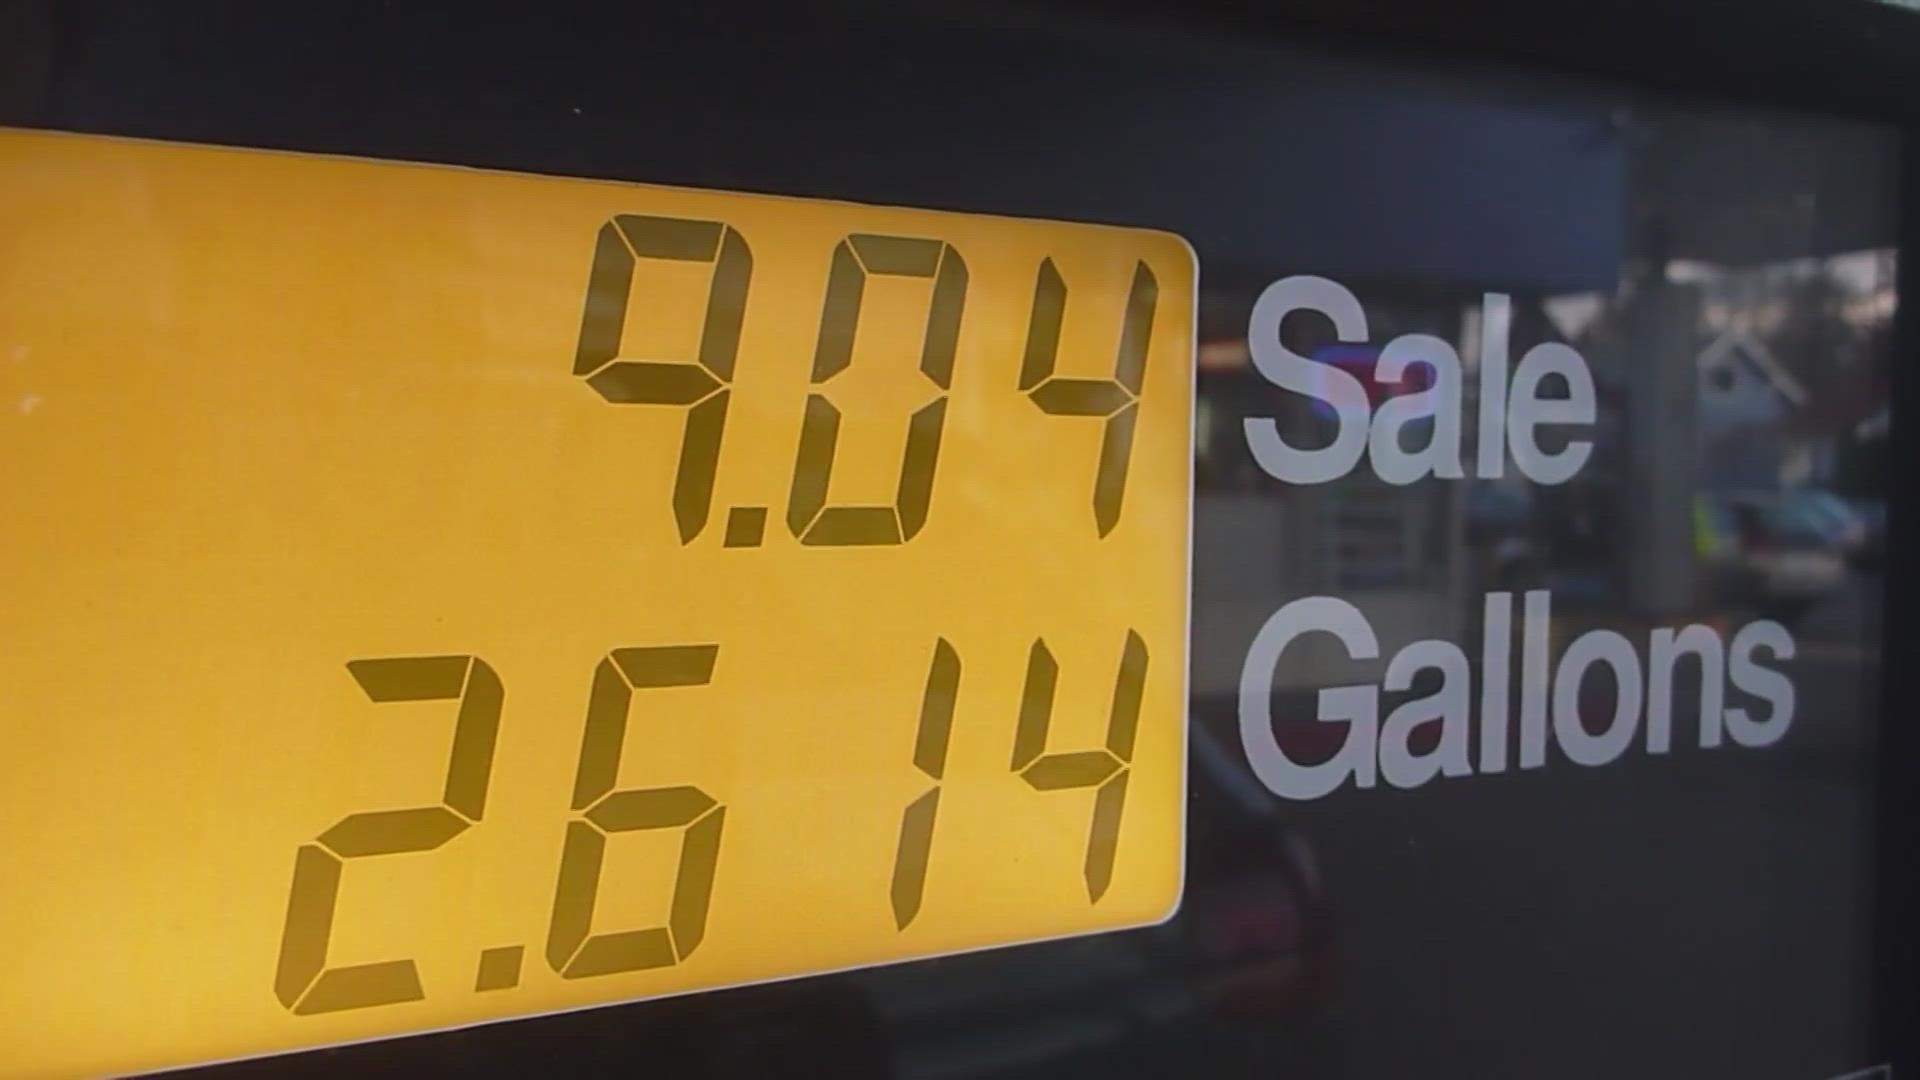 2022 was a year of sky-high prices, including gas prices pummeling our pocketbooks. Will gas prices this year will be more of a pinch or punch at the pump?